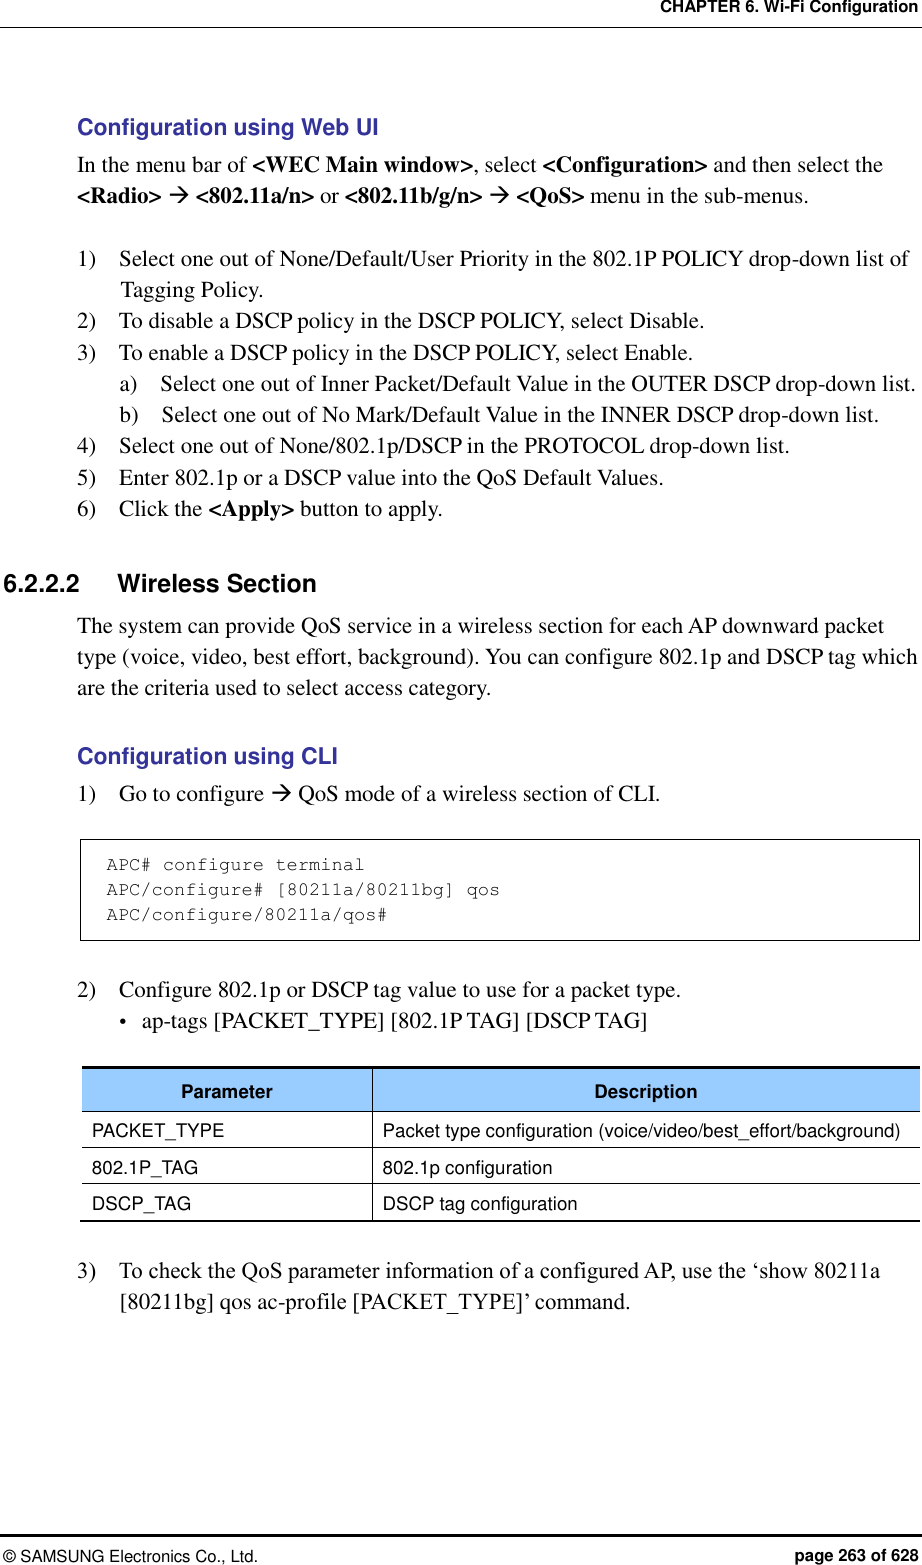 CHAPTER 6. Wi-Fi Configuration ©  SAMSUNG Electronics Co., Ltd.  page 263 of 628 Configuration using Web UI In the menu bar of &lt;WEC Main window&gt;, select &lt;Configuration&gt; and then select the &lt;Radio&gt;  &lt;802.11a/n&gt; or &lt;802.11b/g/n&gt;  &lt;QoS&gt; menu in the sub-menus.  1)    Select one out of None/Default/User Priority in the 802.1P POLICY drop-down list of Tagging Policy. 2)    To disable a DSCP policy in the DSCP POLICY, select Disable. 3)    To enable a DSCP policy in the DSCP POLICY, select Enable. a)    Select one out of Inner Packet/Default Value in the OUTER DSCP drop-down list. b)    Select one out of No Mark/Default Value in the INNER DSCP drop-down list. 4)    Select one out of None/802.1p/DSCP in the PROTOCOL drop-down list. 5)    Enter 802.1p or a DSCP value into the QoS Default Values. 6)    Click the &lt;Apply&gt; button to apply.  6.2.2.2  Wireless Section The system can provide QoS service in a wireless section for each AP downward packet type (voice, video, best effort, background). You can configure 802.1p and DSCP tag which are the criteria used to select access category.  Configuration using CLI 1)    Go to configure  QoS mode of a wireless section of CLI.    APC# configure terminal APC/configure# [80211a/80211bg] qos APC/configure/80211a/qos#  2)    Configure 802.1p or DSCP tag value to use for a packet type.  ap-tags [PACKET_TYPE] [802.1P TAG] [DSCP TAG]  Parameter Description PACKET_TYPE Packet type configuration (voice/video/best_effort/background) 802.1P_TAG 802.1p configuration DSCP_TAG DSCP tag configuration  3)    To check the QoS parameter information of a configured AP, use the ‘show 80211a [80211bg] qos ac-profile [PACKET_TYPE]’ command.  